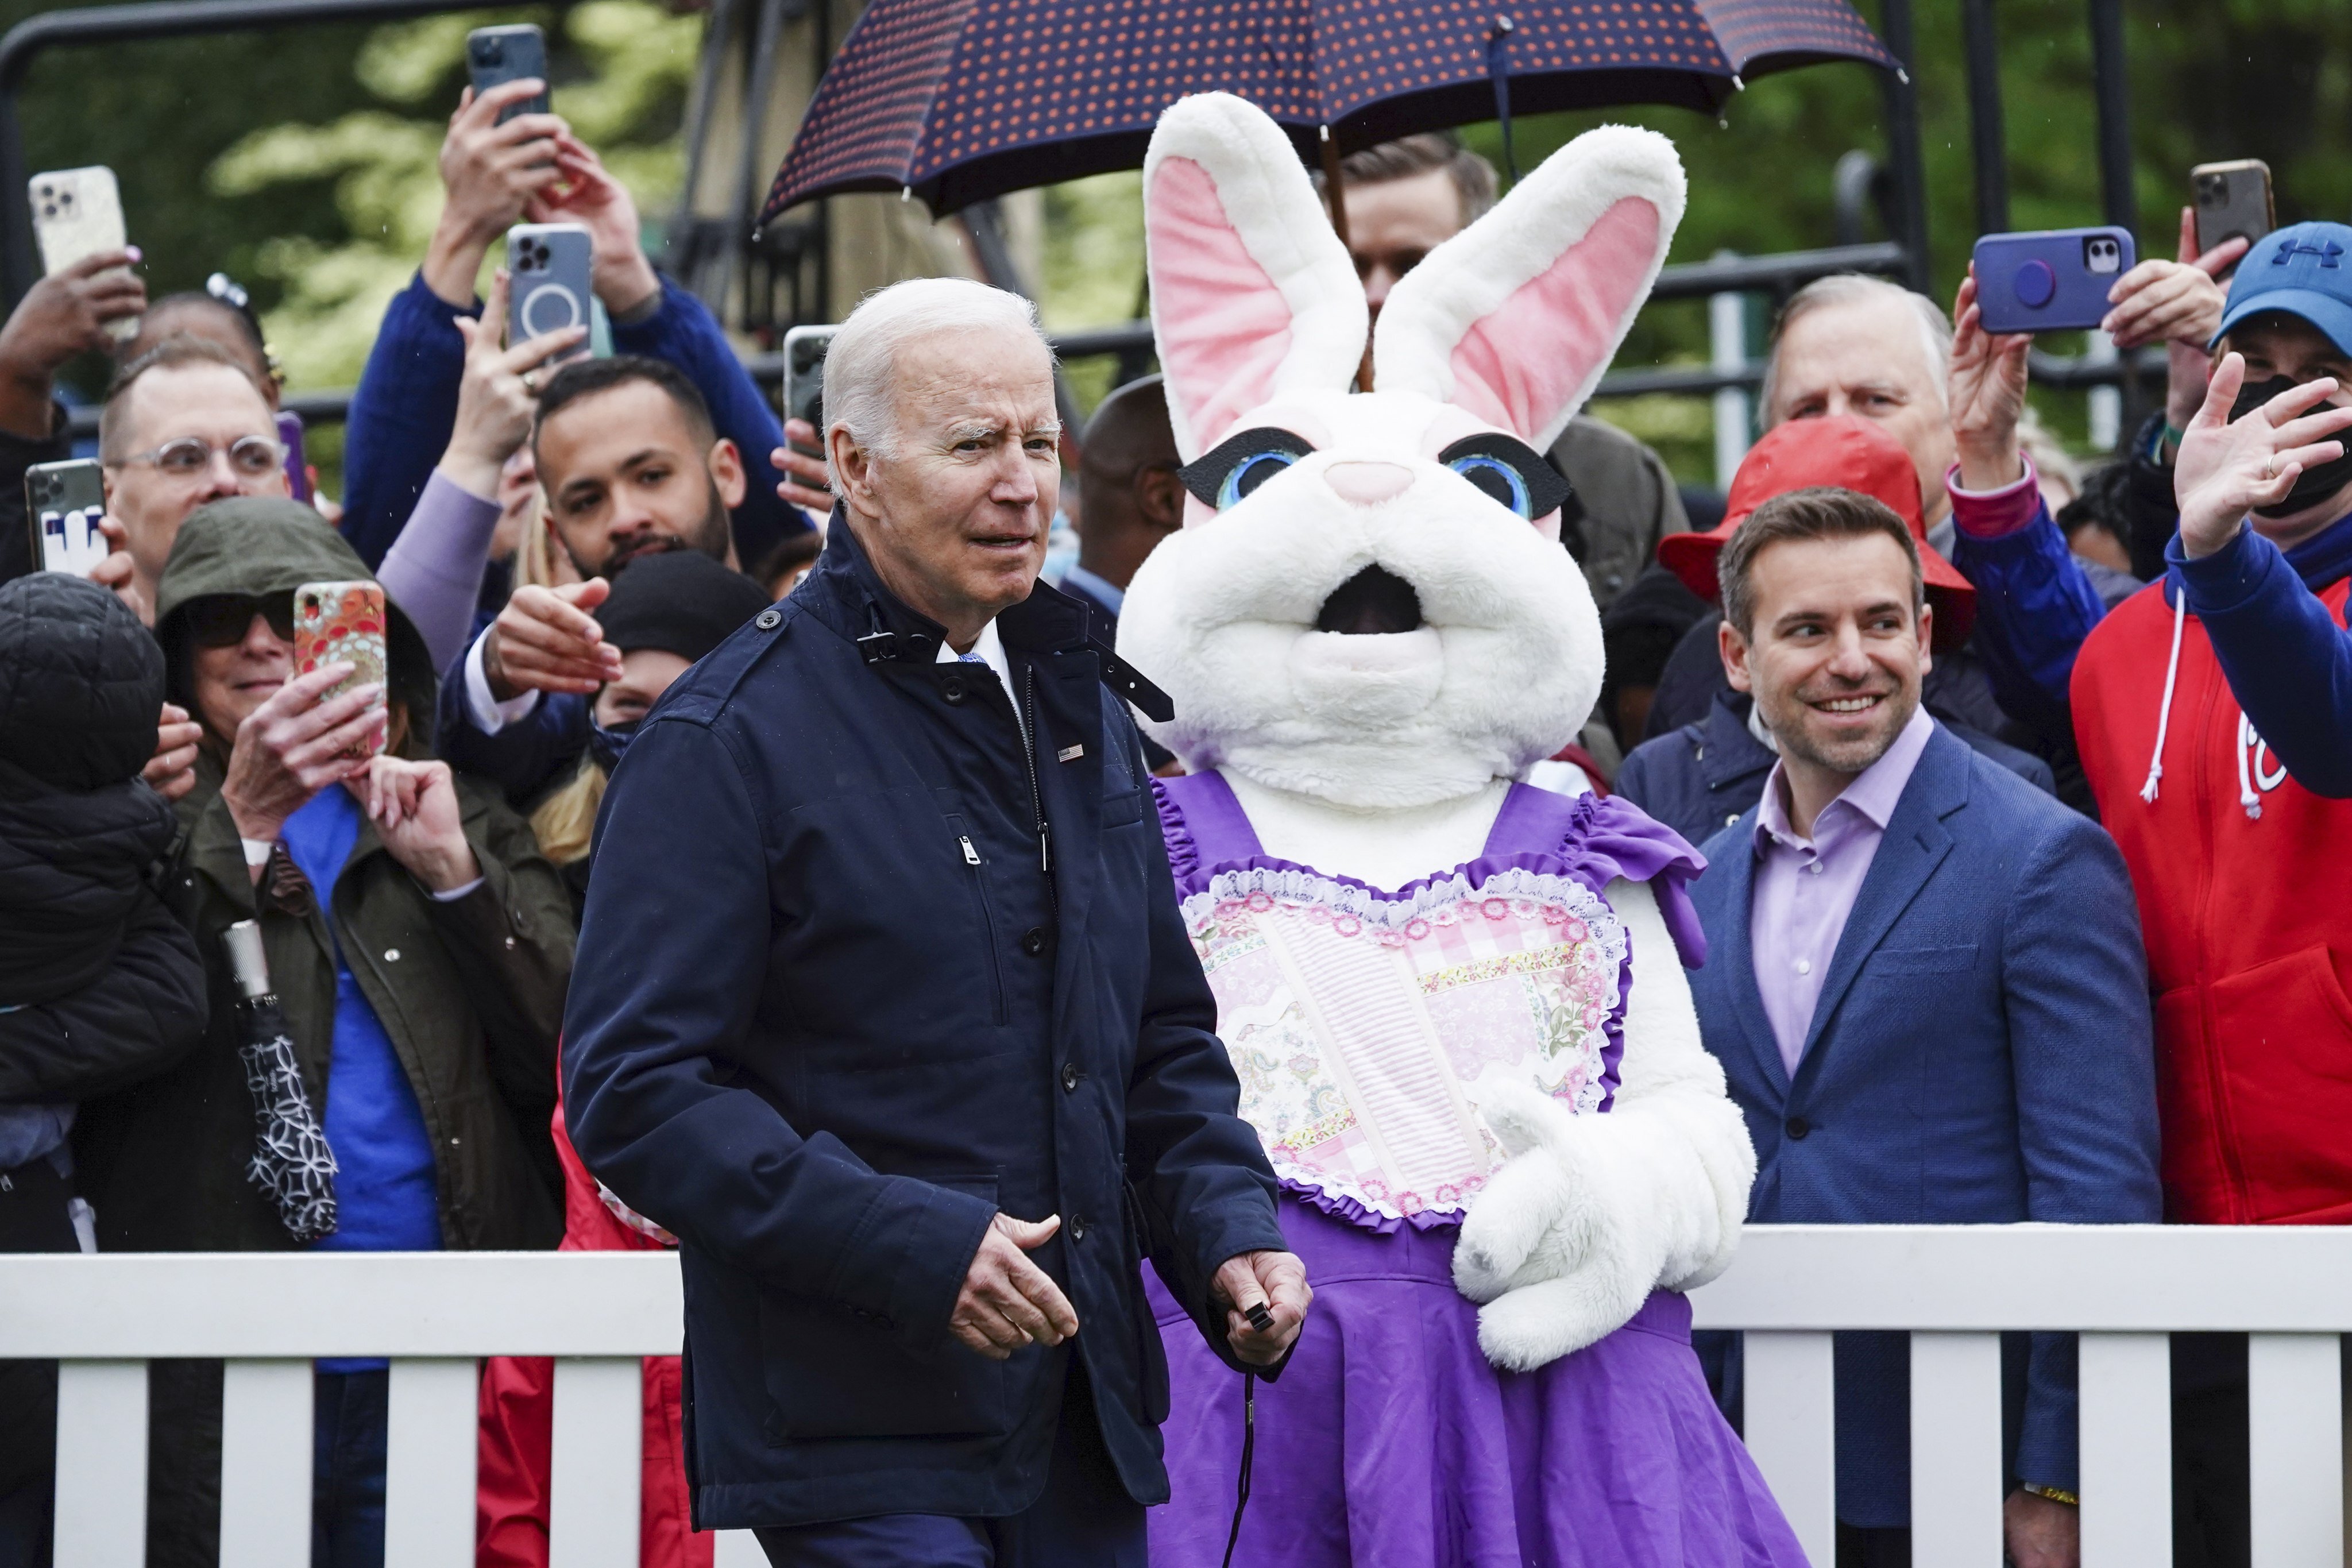 US President Joe Biden greets the Easter bunny as he participates in the White House Easter Egg Roll in Washington on April 18. Photo: EPA-EFE